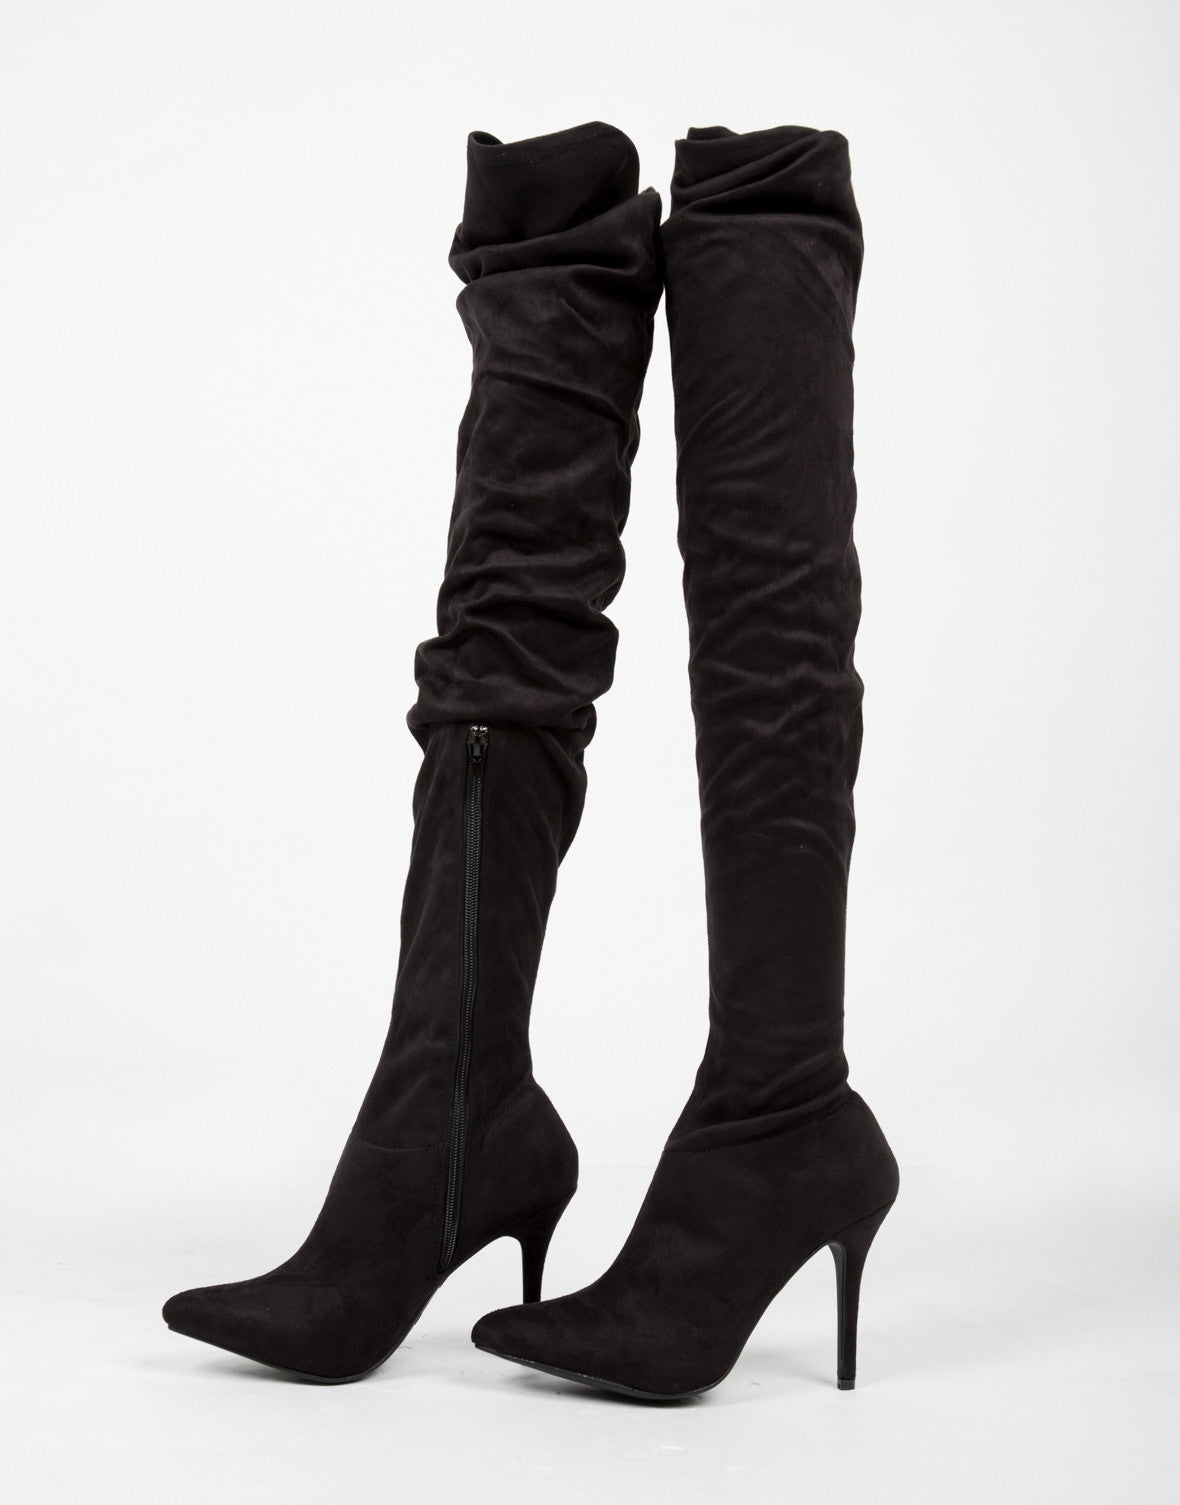 Thigh High Suede Heel Boots Black Suede Boots Black Heels 2020ave 7250